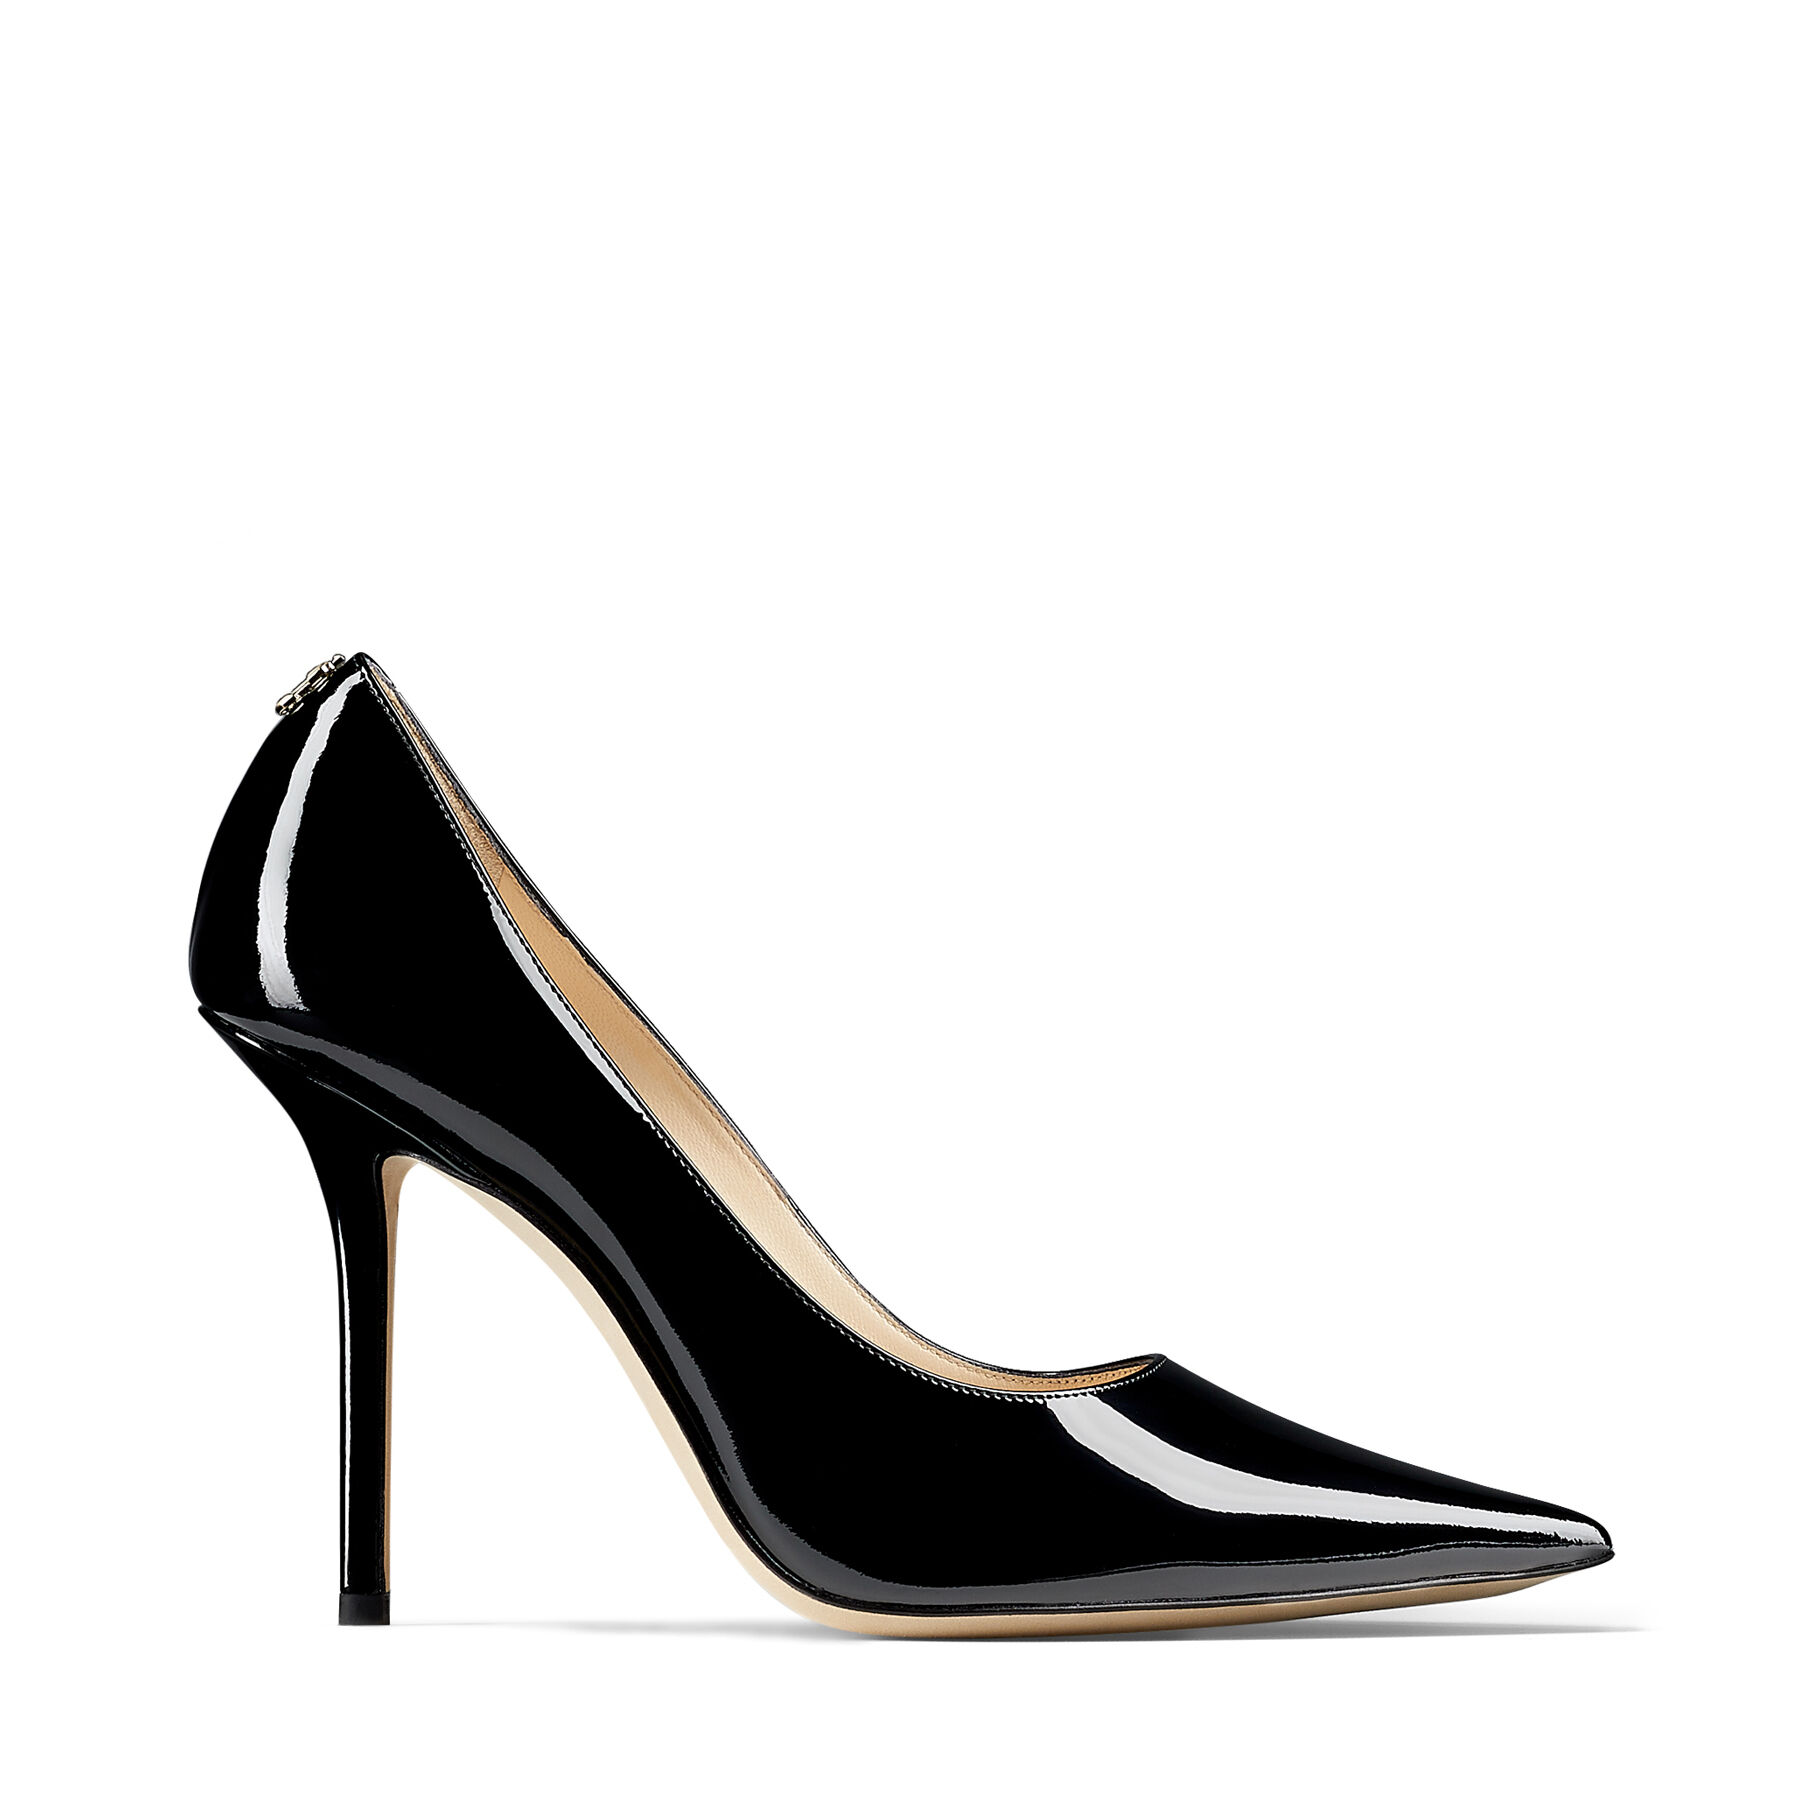 Embankment Illusion smeltet Black Patent Leather Pointed-Toe Pumps with JC Emblem | LOVE 100 | Autumn  Winter 19 | JIMMY CHOO